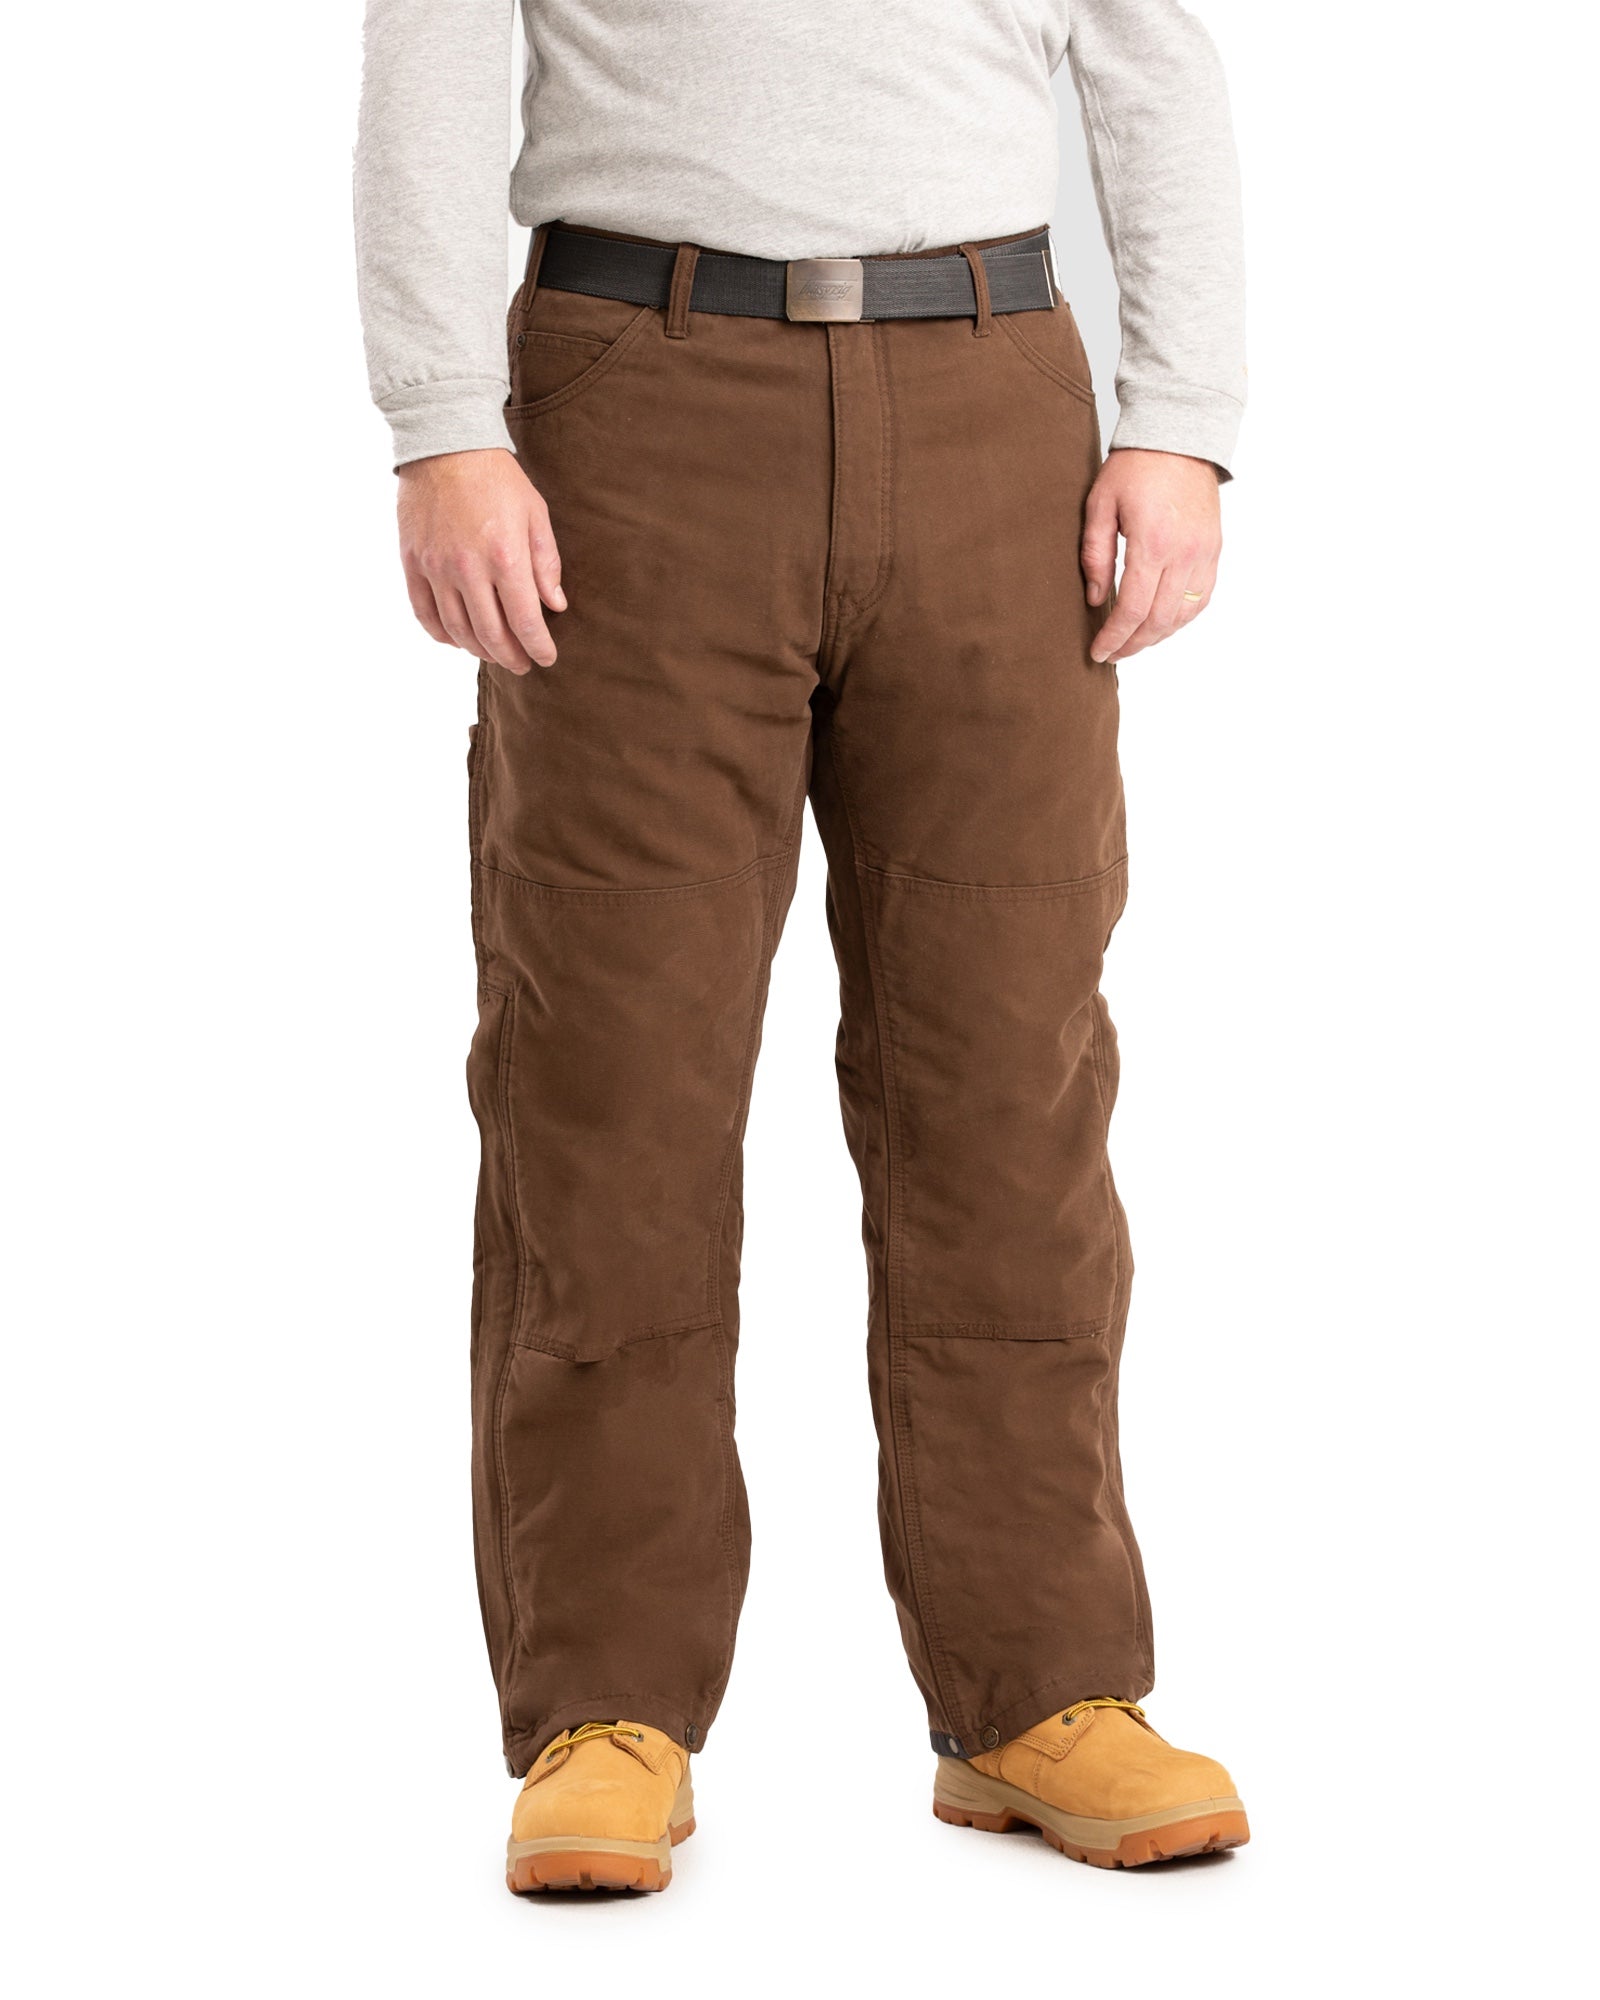 P966BB Highland Washed Duck Insulated Outer Pant